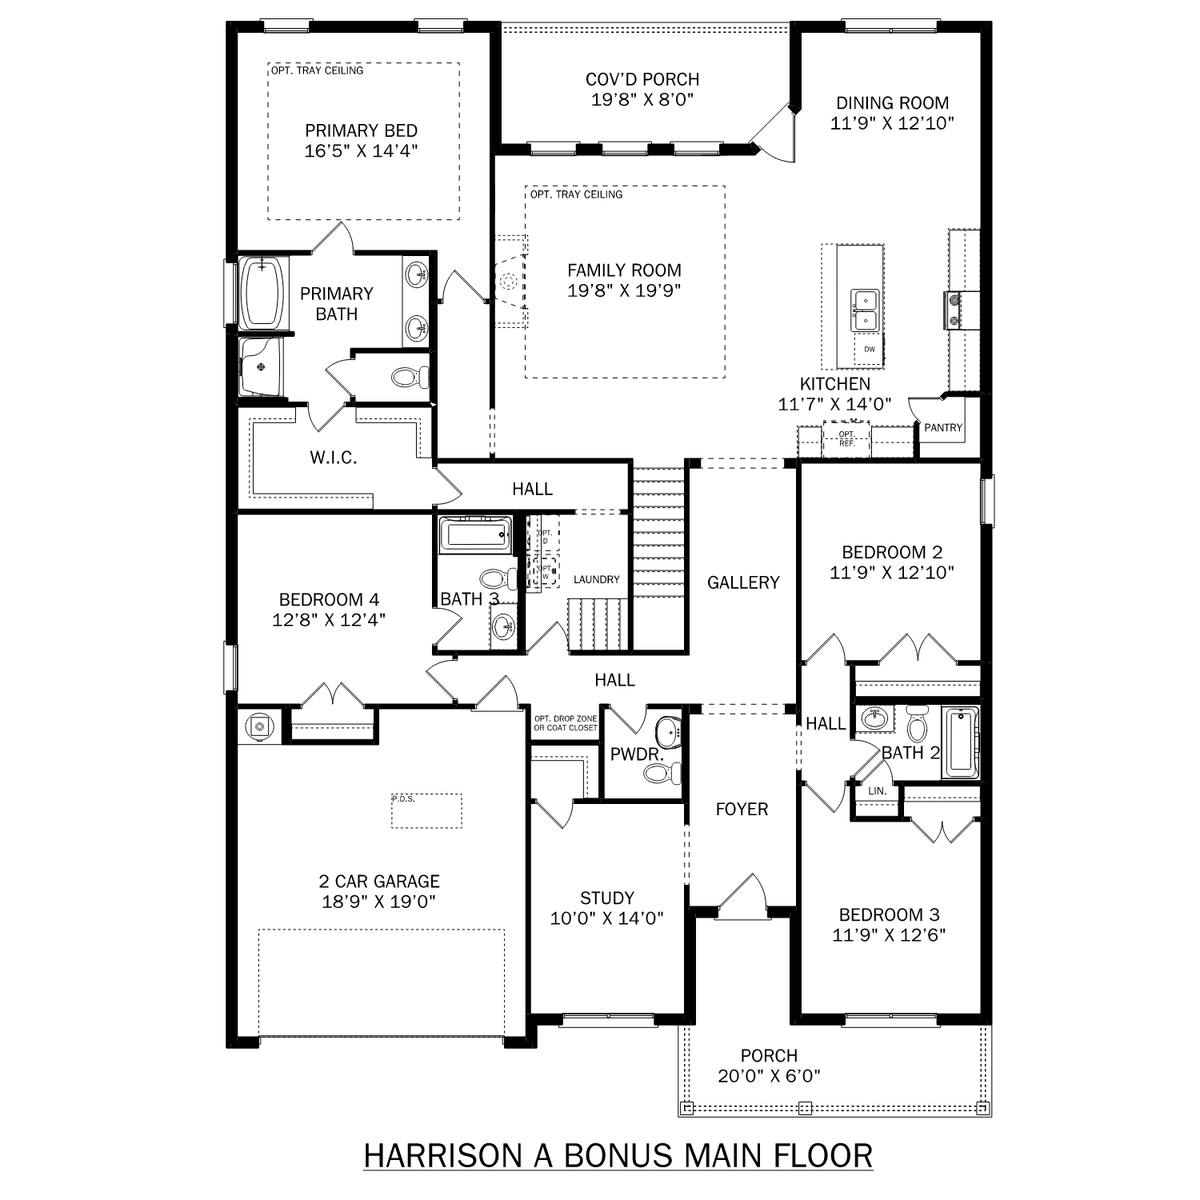 1 - The Harrison with Bonus buildable floor plan layout in Davidson Homes' Kendall Downs community.